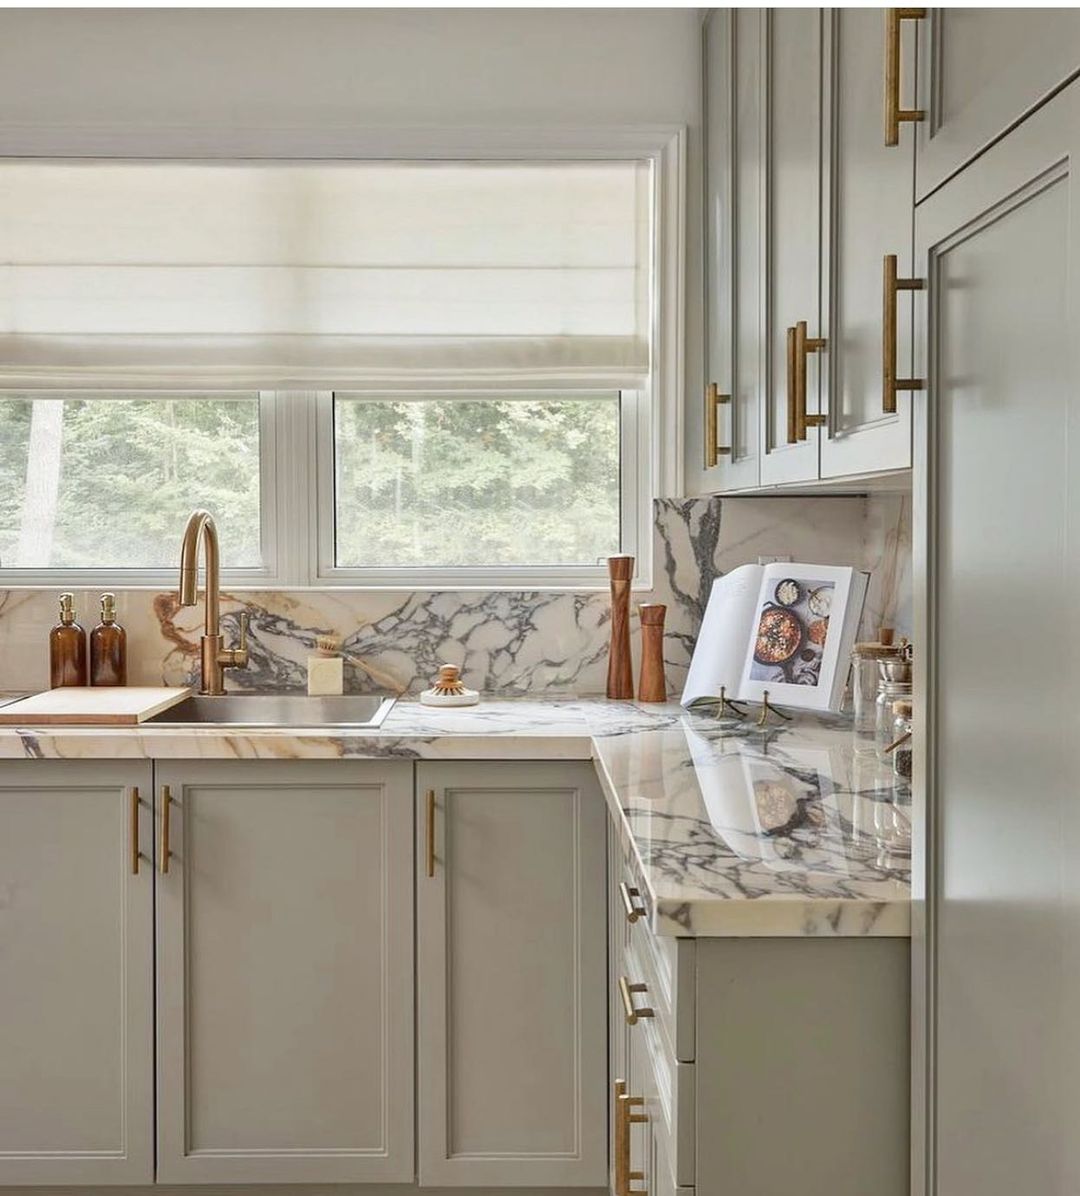 Kitchen with Calacatta Paonazzo porcelain countertops. Photo by Instagram user @seabrightlane.